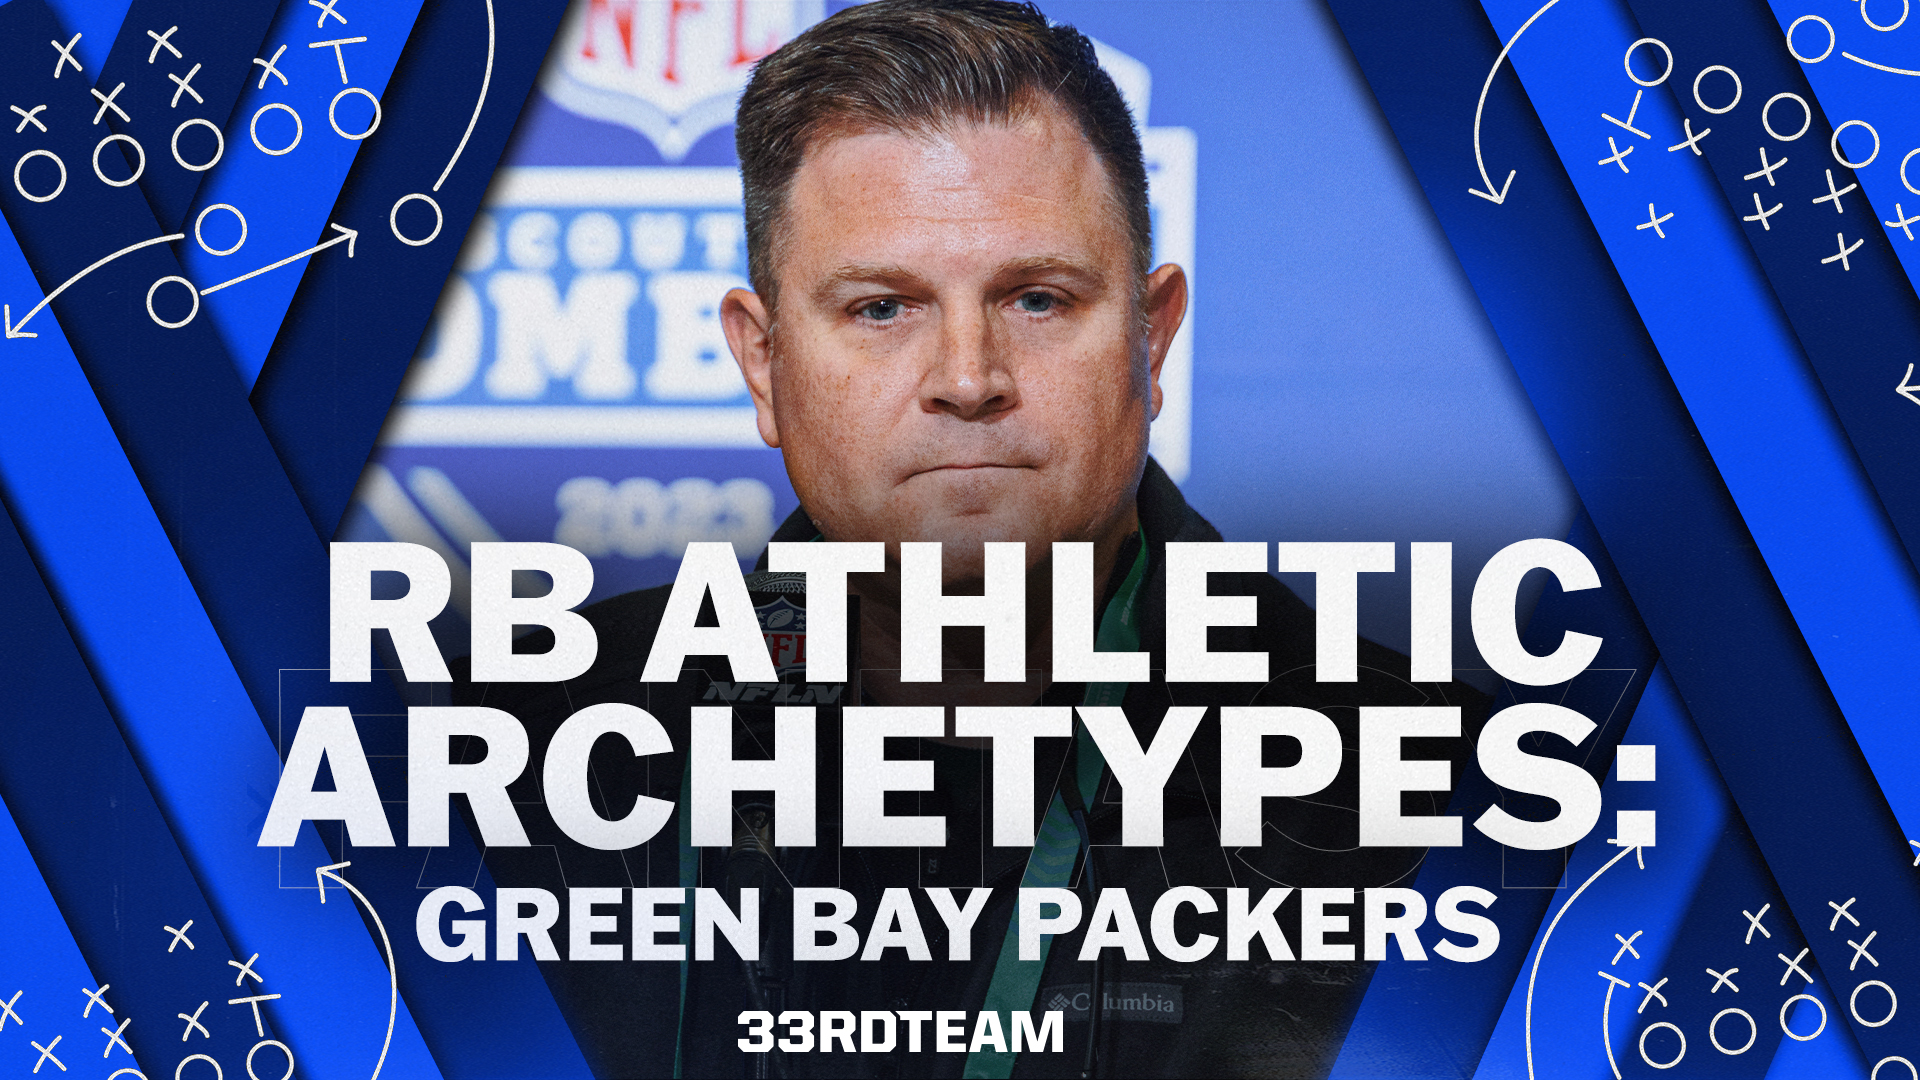 RB Athletic Archetypes: Green Bay Packers